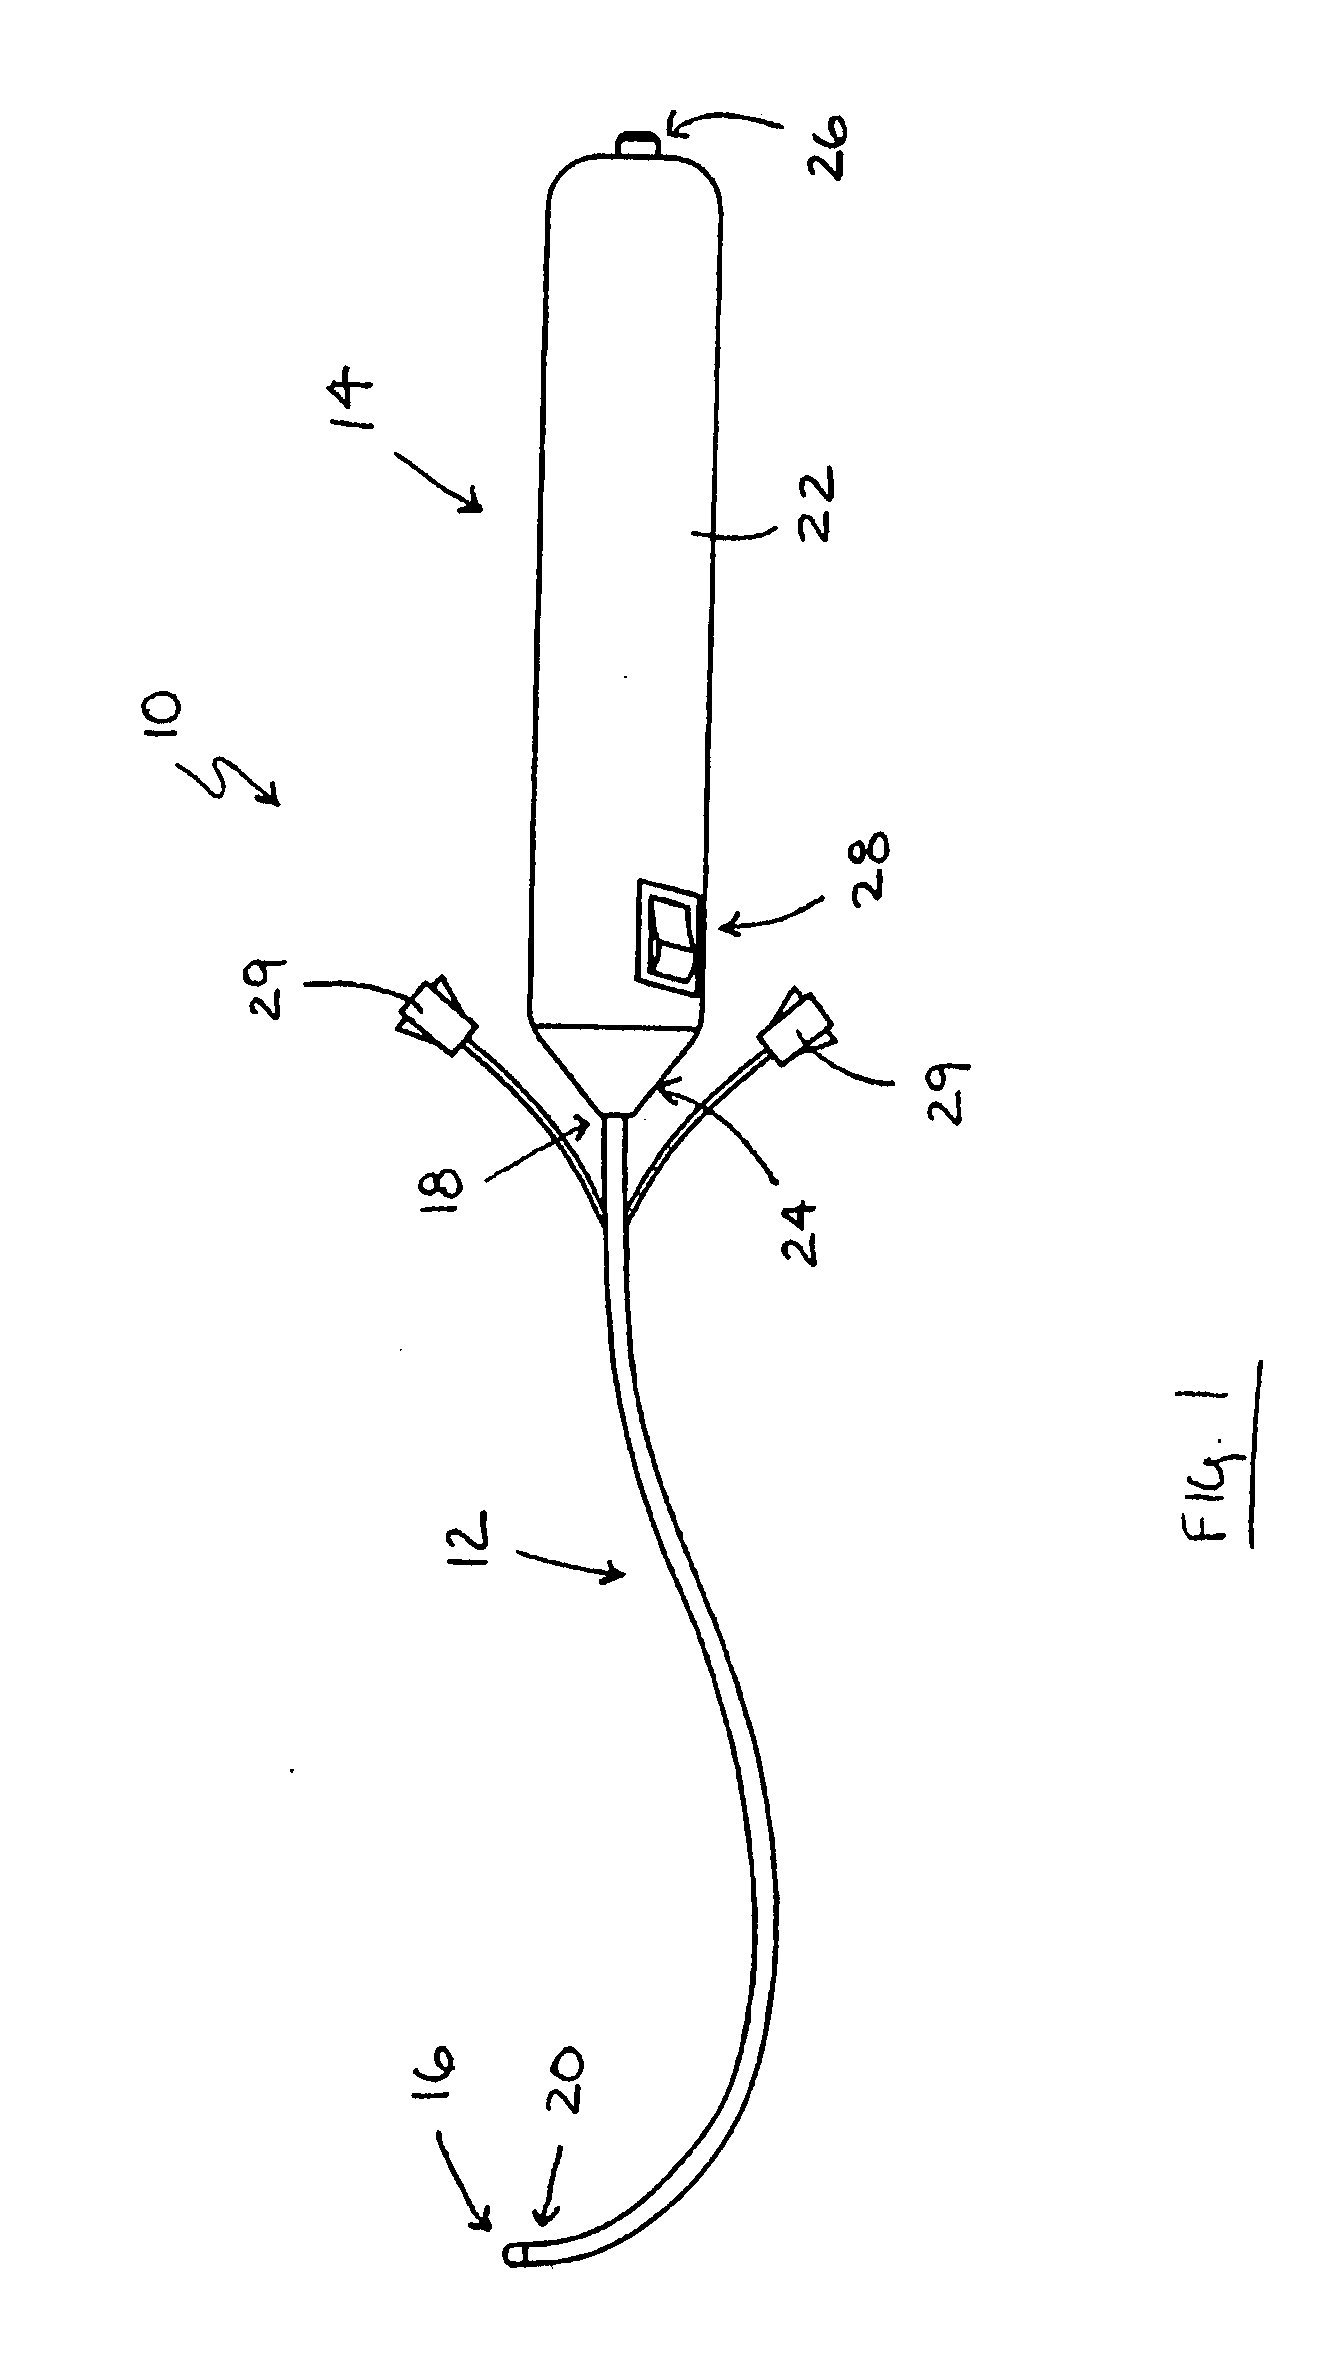 Optical surgical device and methods of use